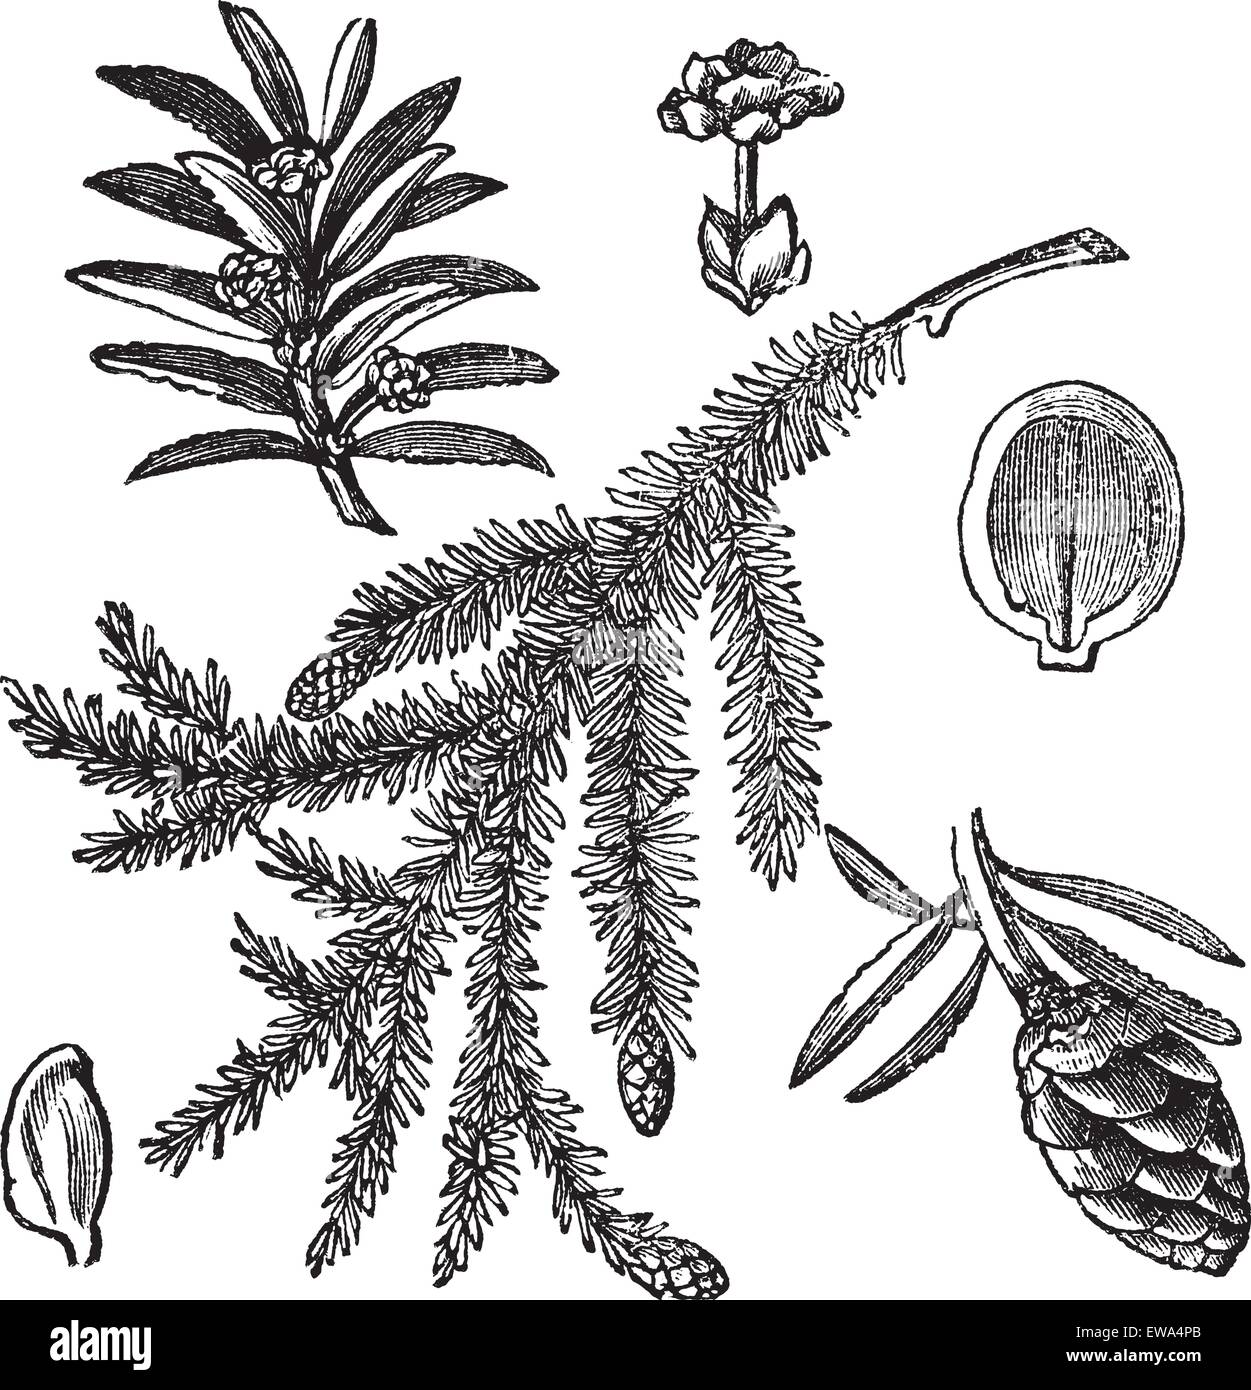 Canadian Hemlock or Tsuga canadensis or Eastern Hemlock, vintage engraving. Old engraved illustration of Canadian Hemlock isolated on a white background. Stock Vector